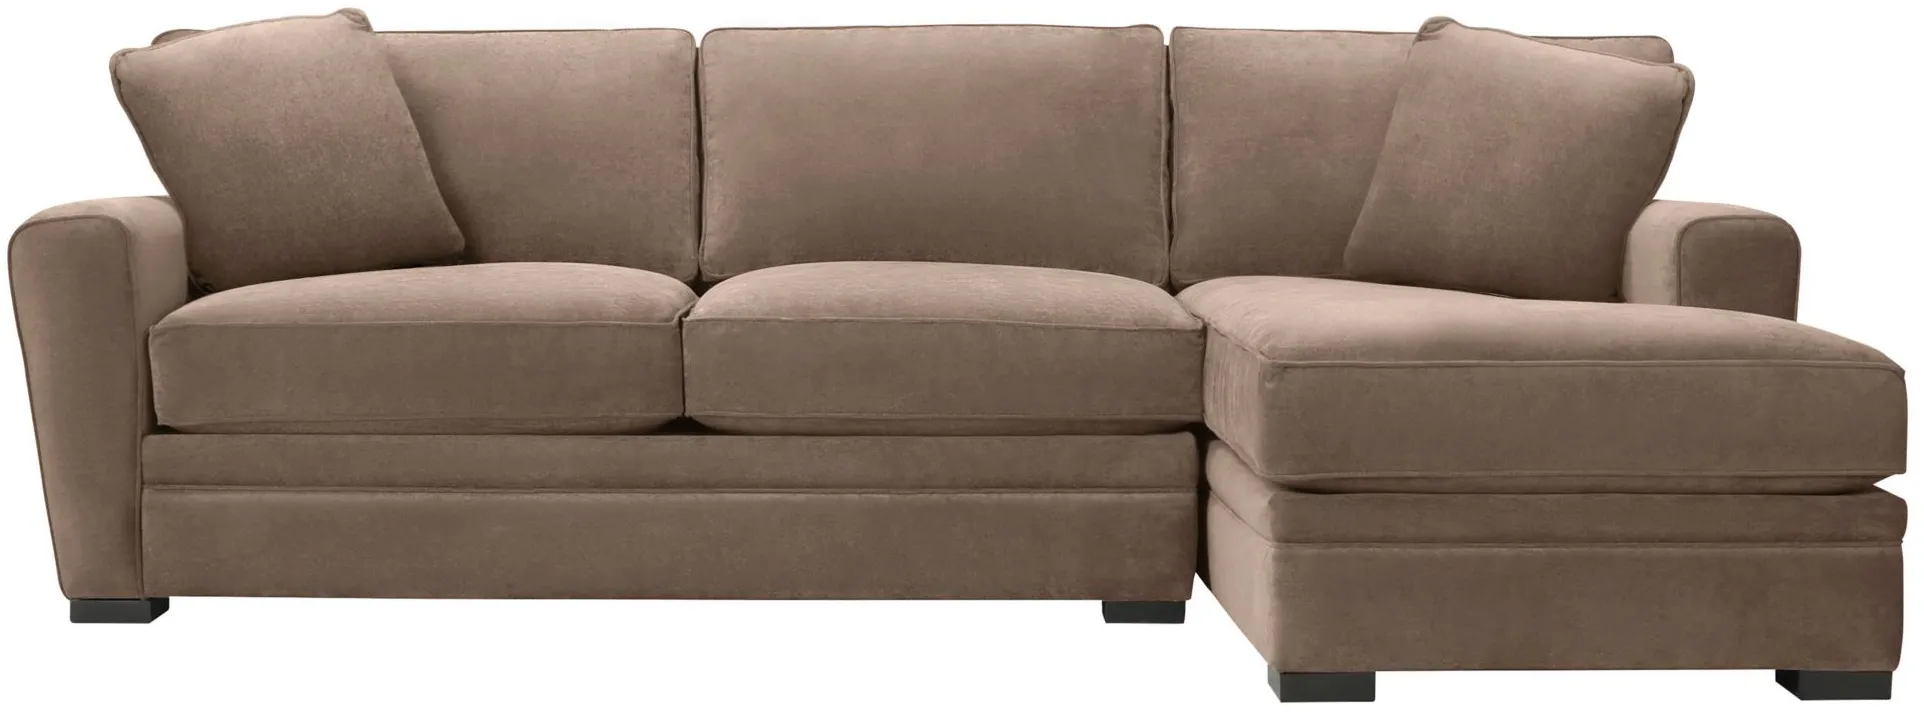 Artemis II 2-pc. Full Sleeper Right Arm Facing Sectional Sofa in Gypsy Taupe by Jonathan Louis